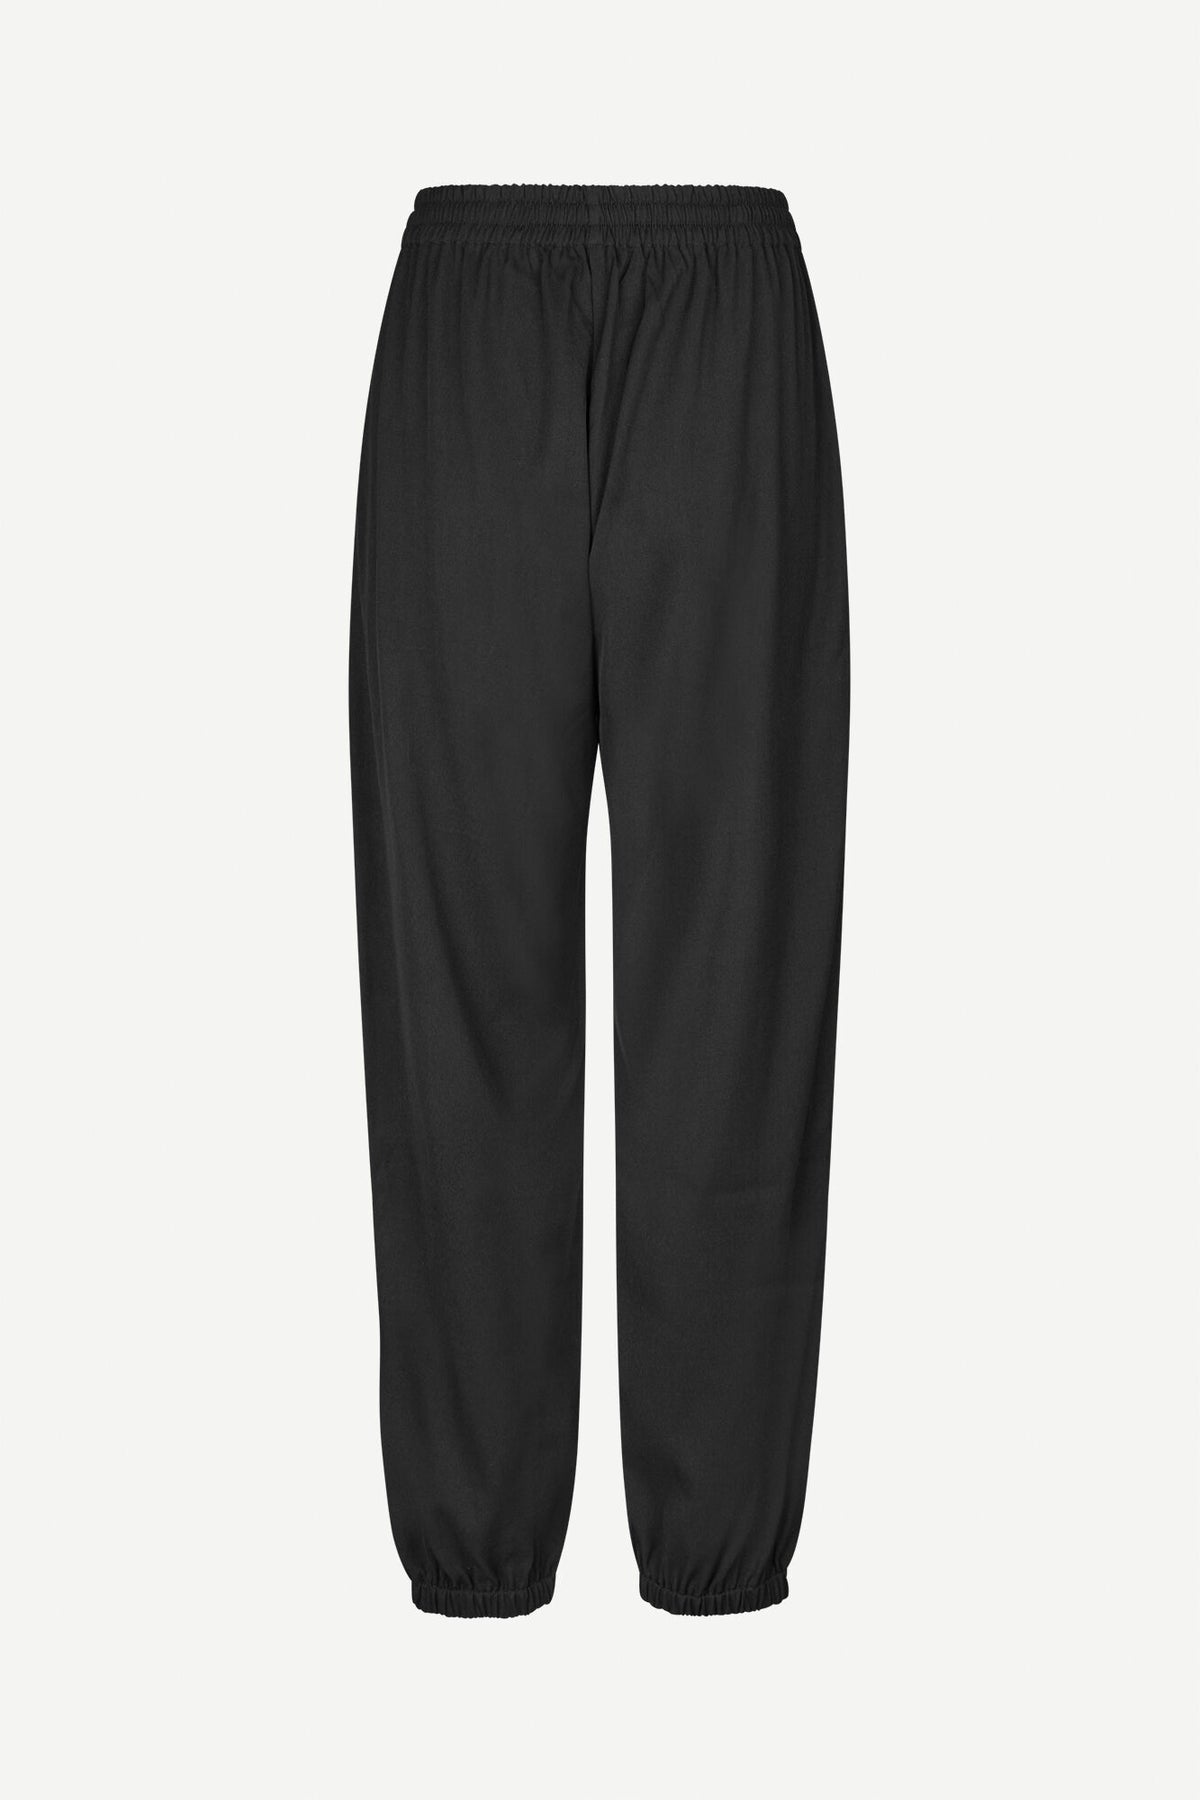 Black casual trousers with elasticated waistband and elasticated cuffs